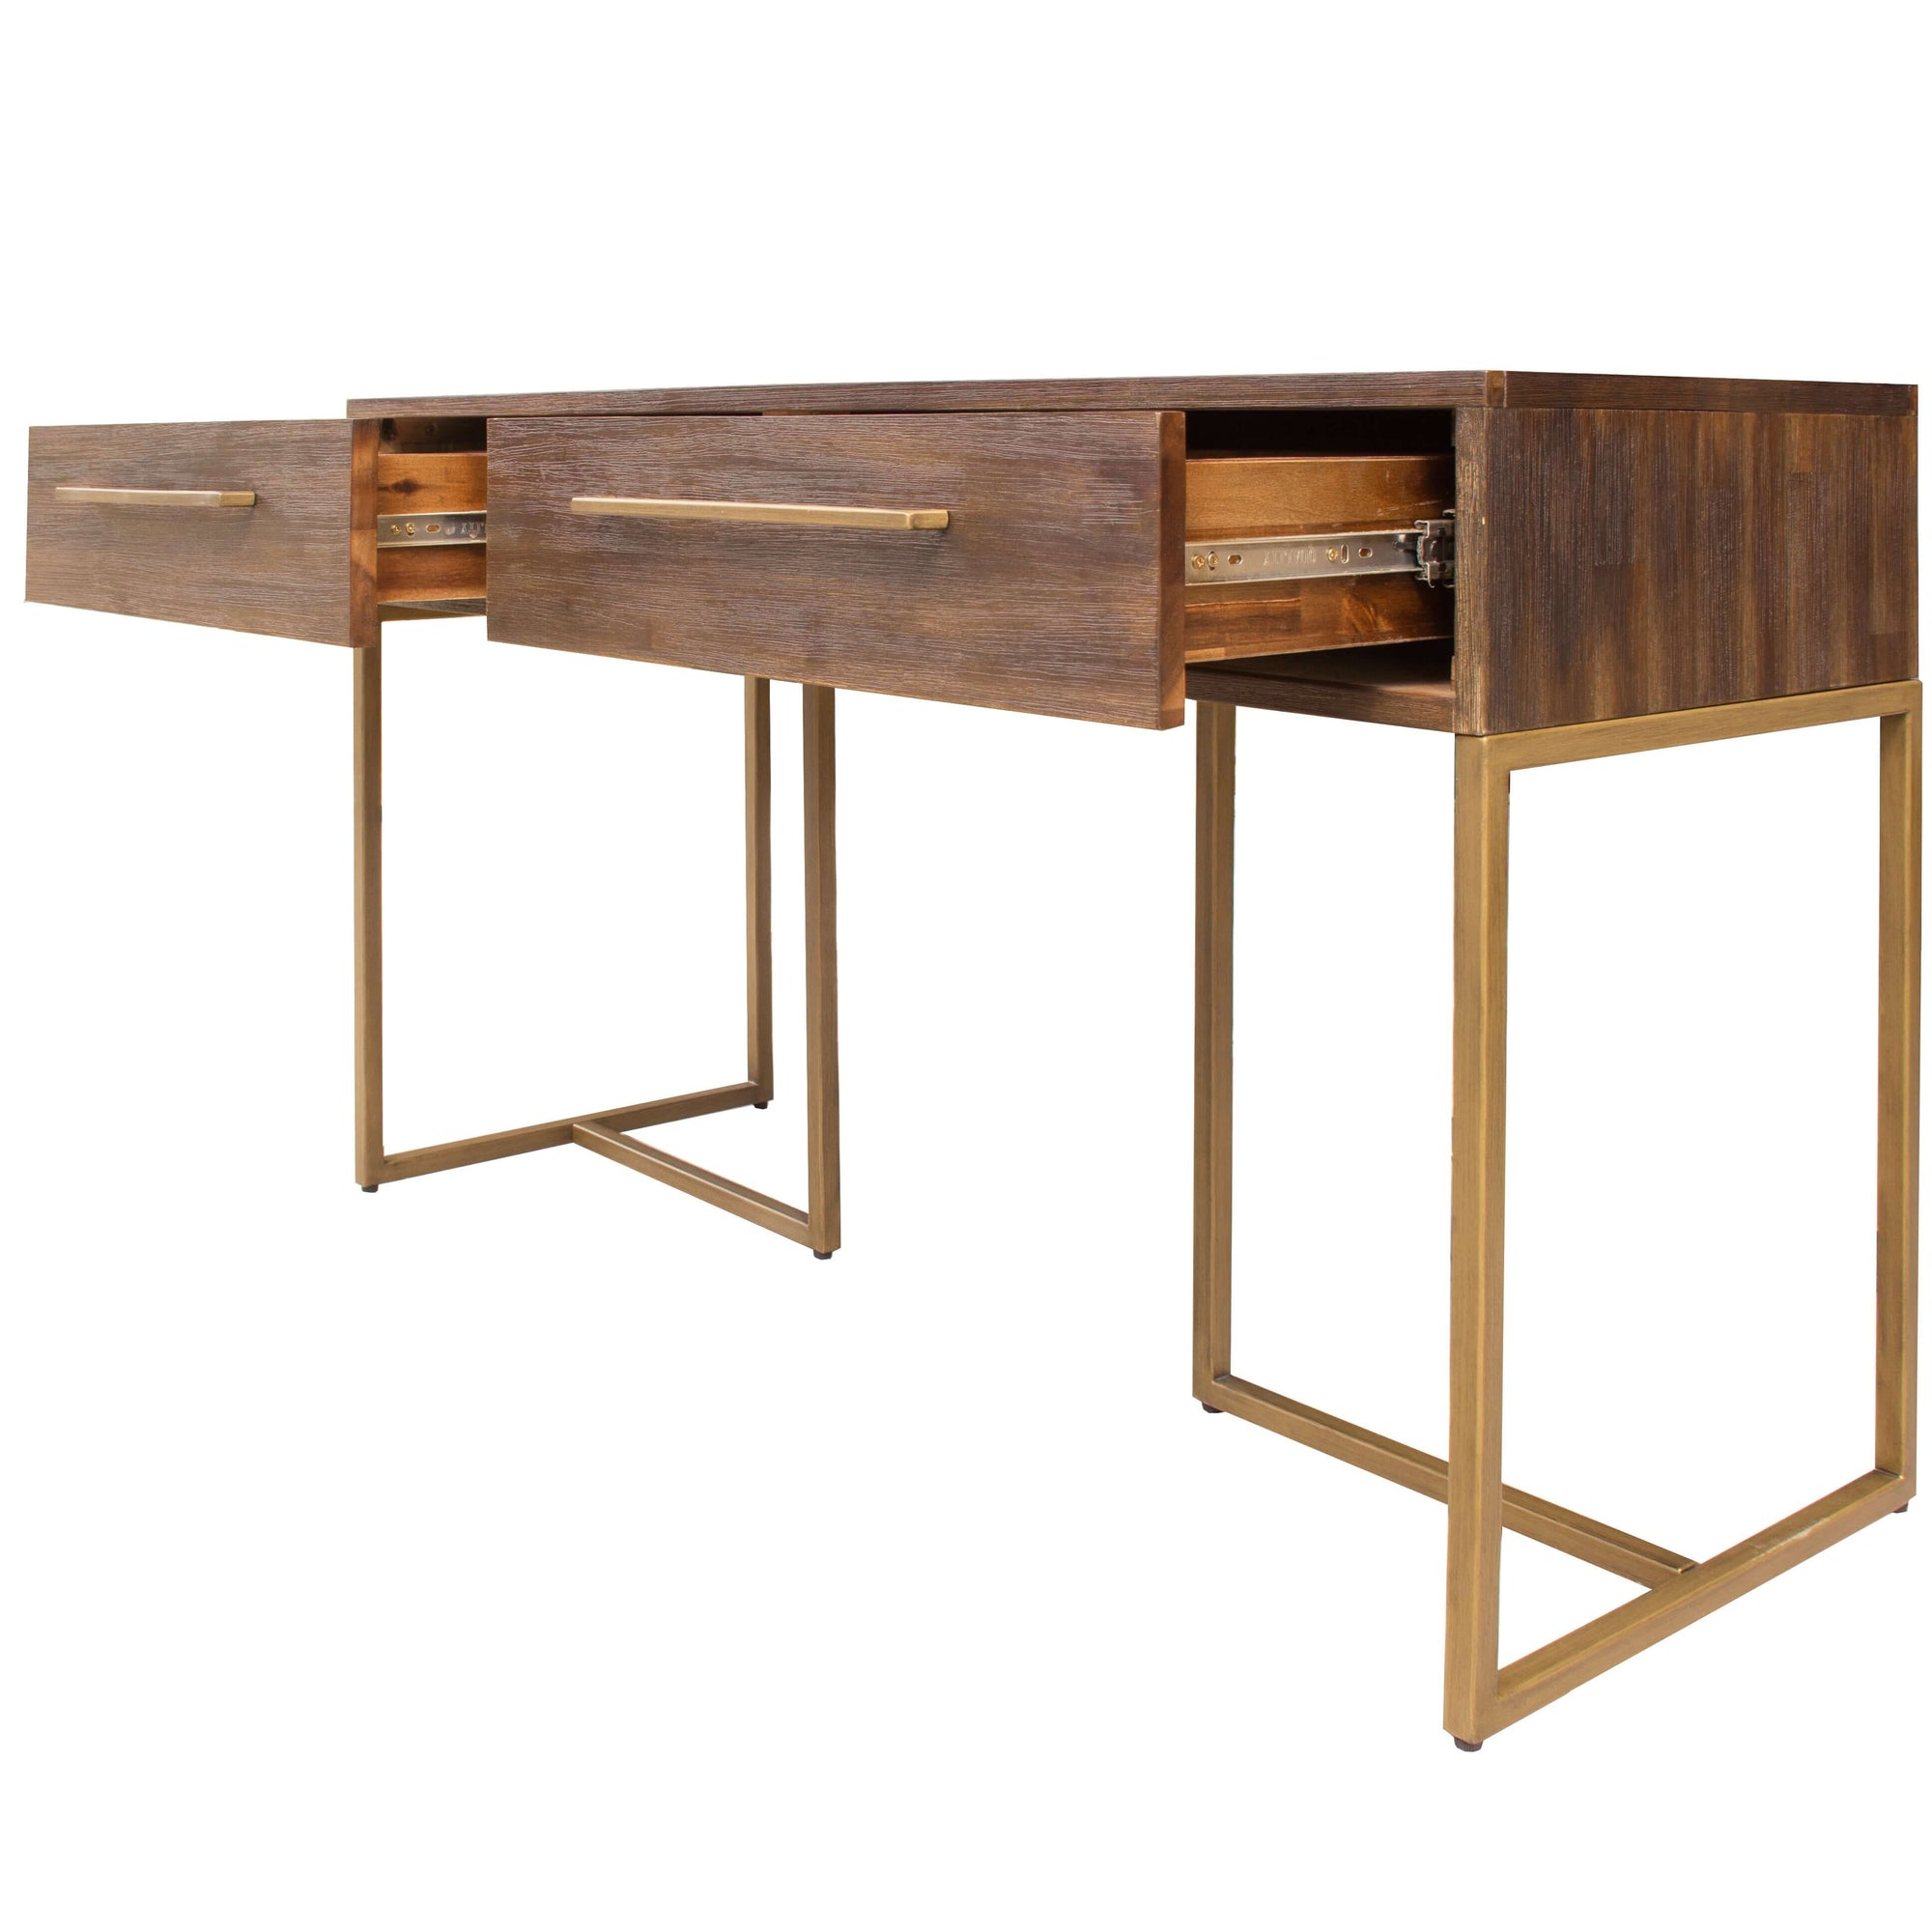 Tuberose Console Hallway Entry Table 120cm Solid Acacia Timber Wood - Brown-Upinteriors